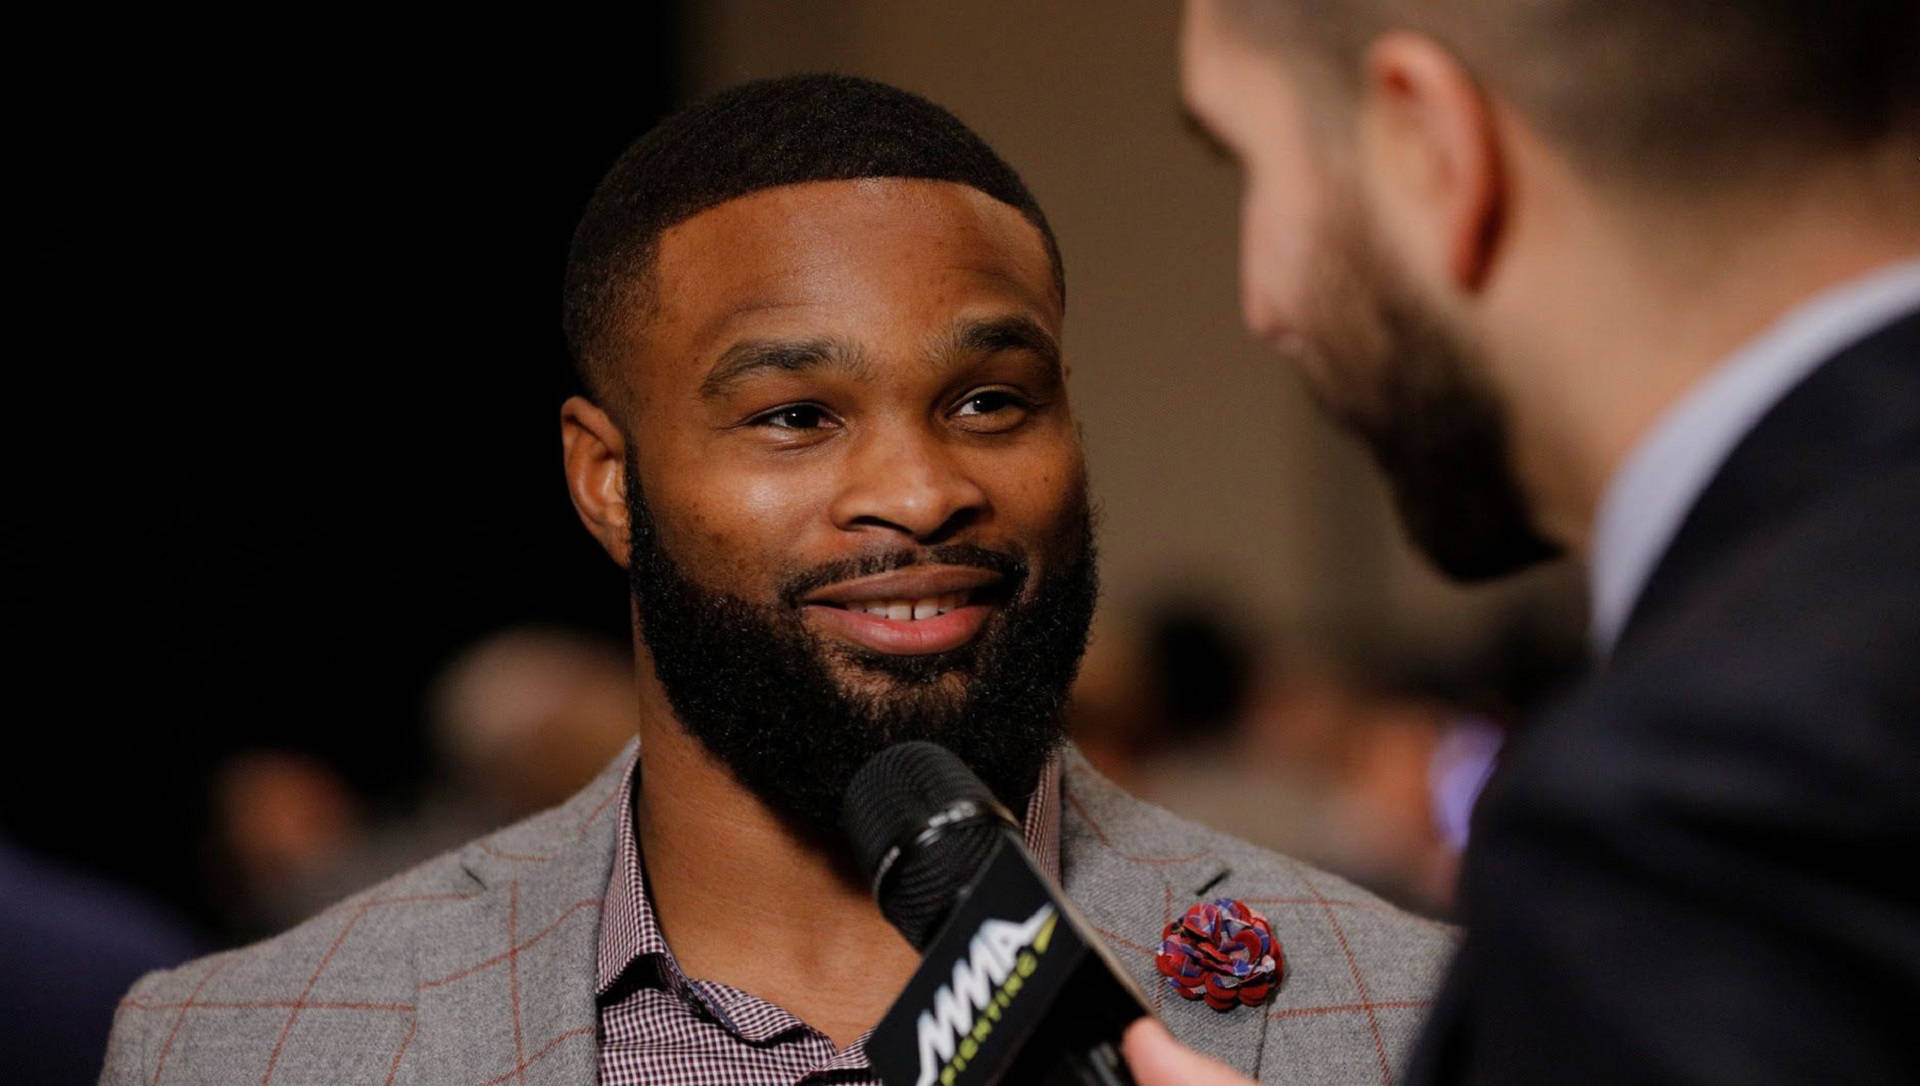 Tyron Woodley In Light Grey Suit Background